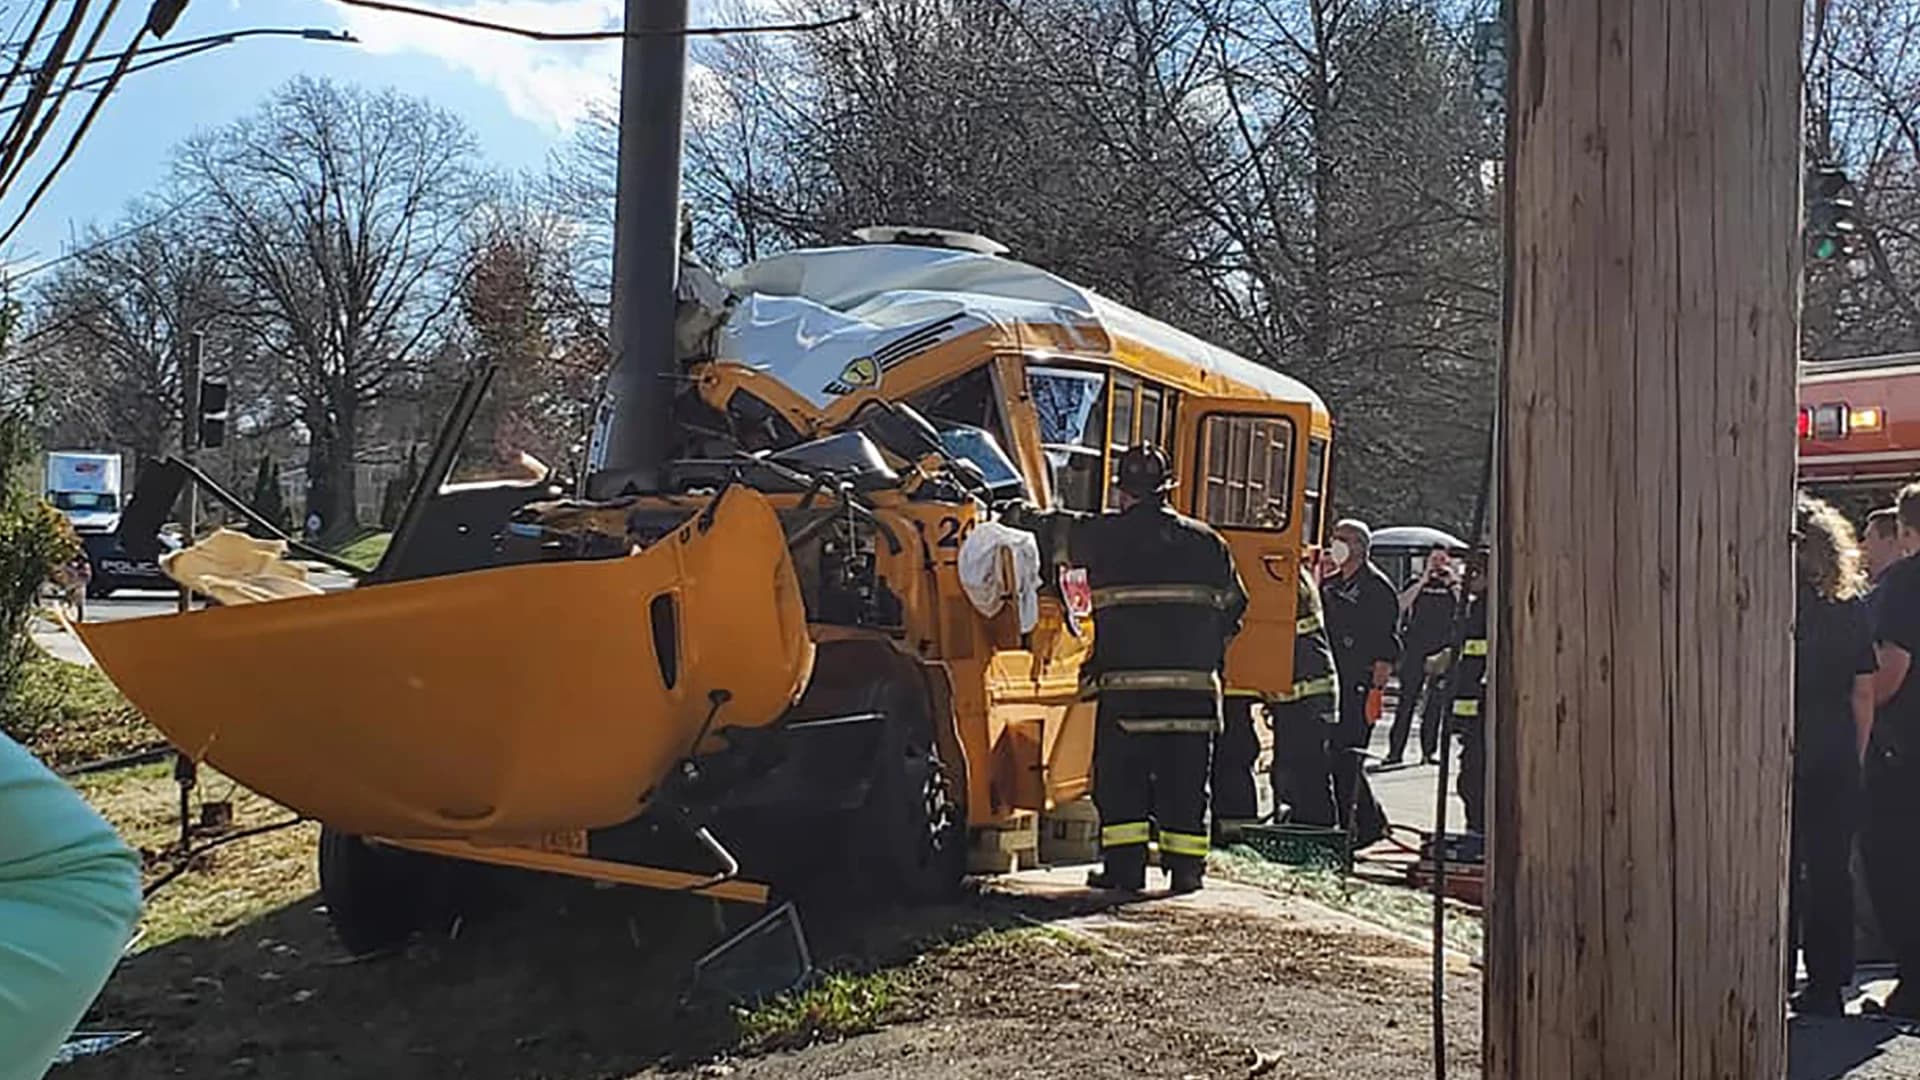 Driver hospitalized when school bus collides with truck in Bardonia